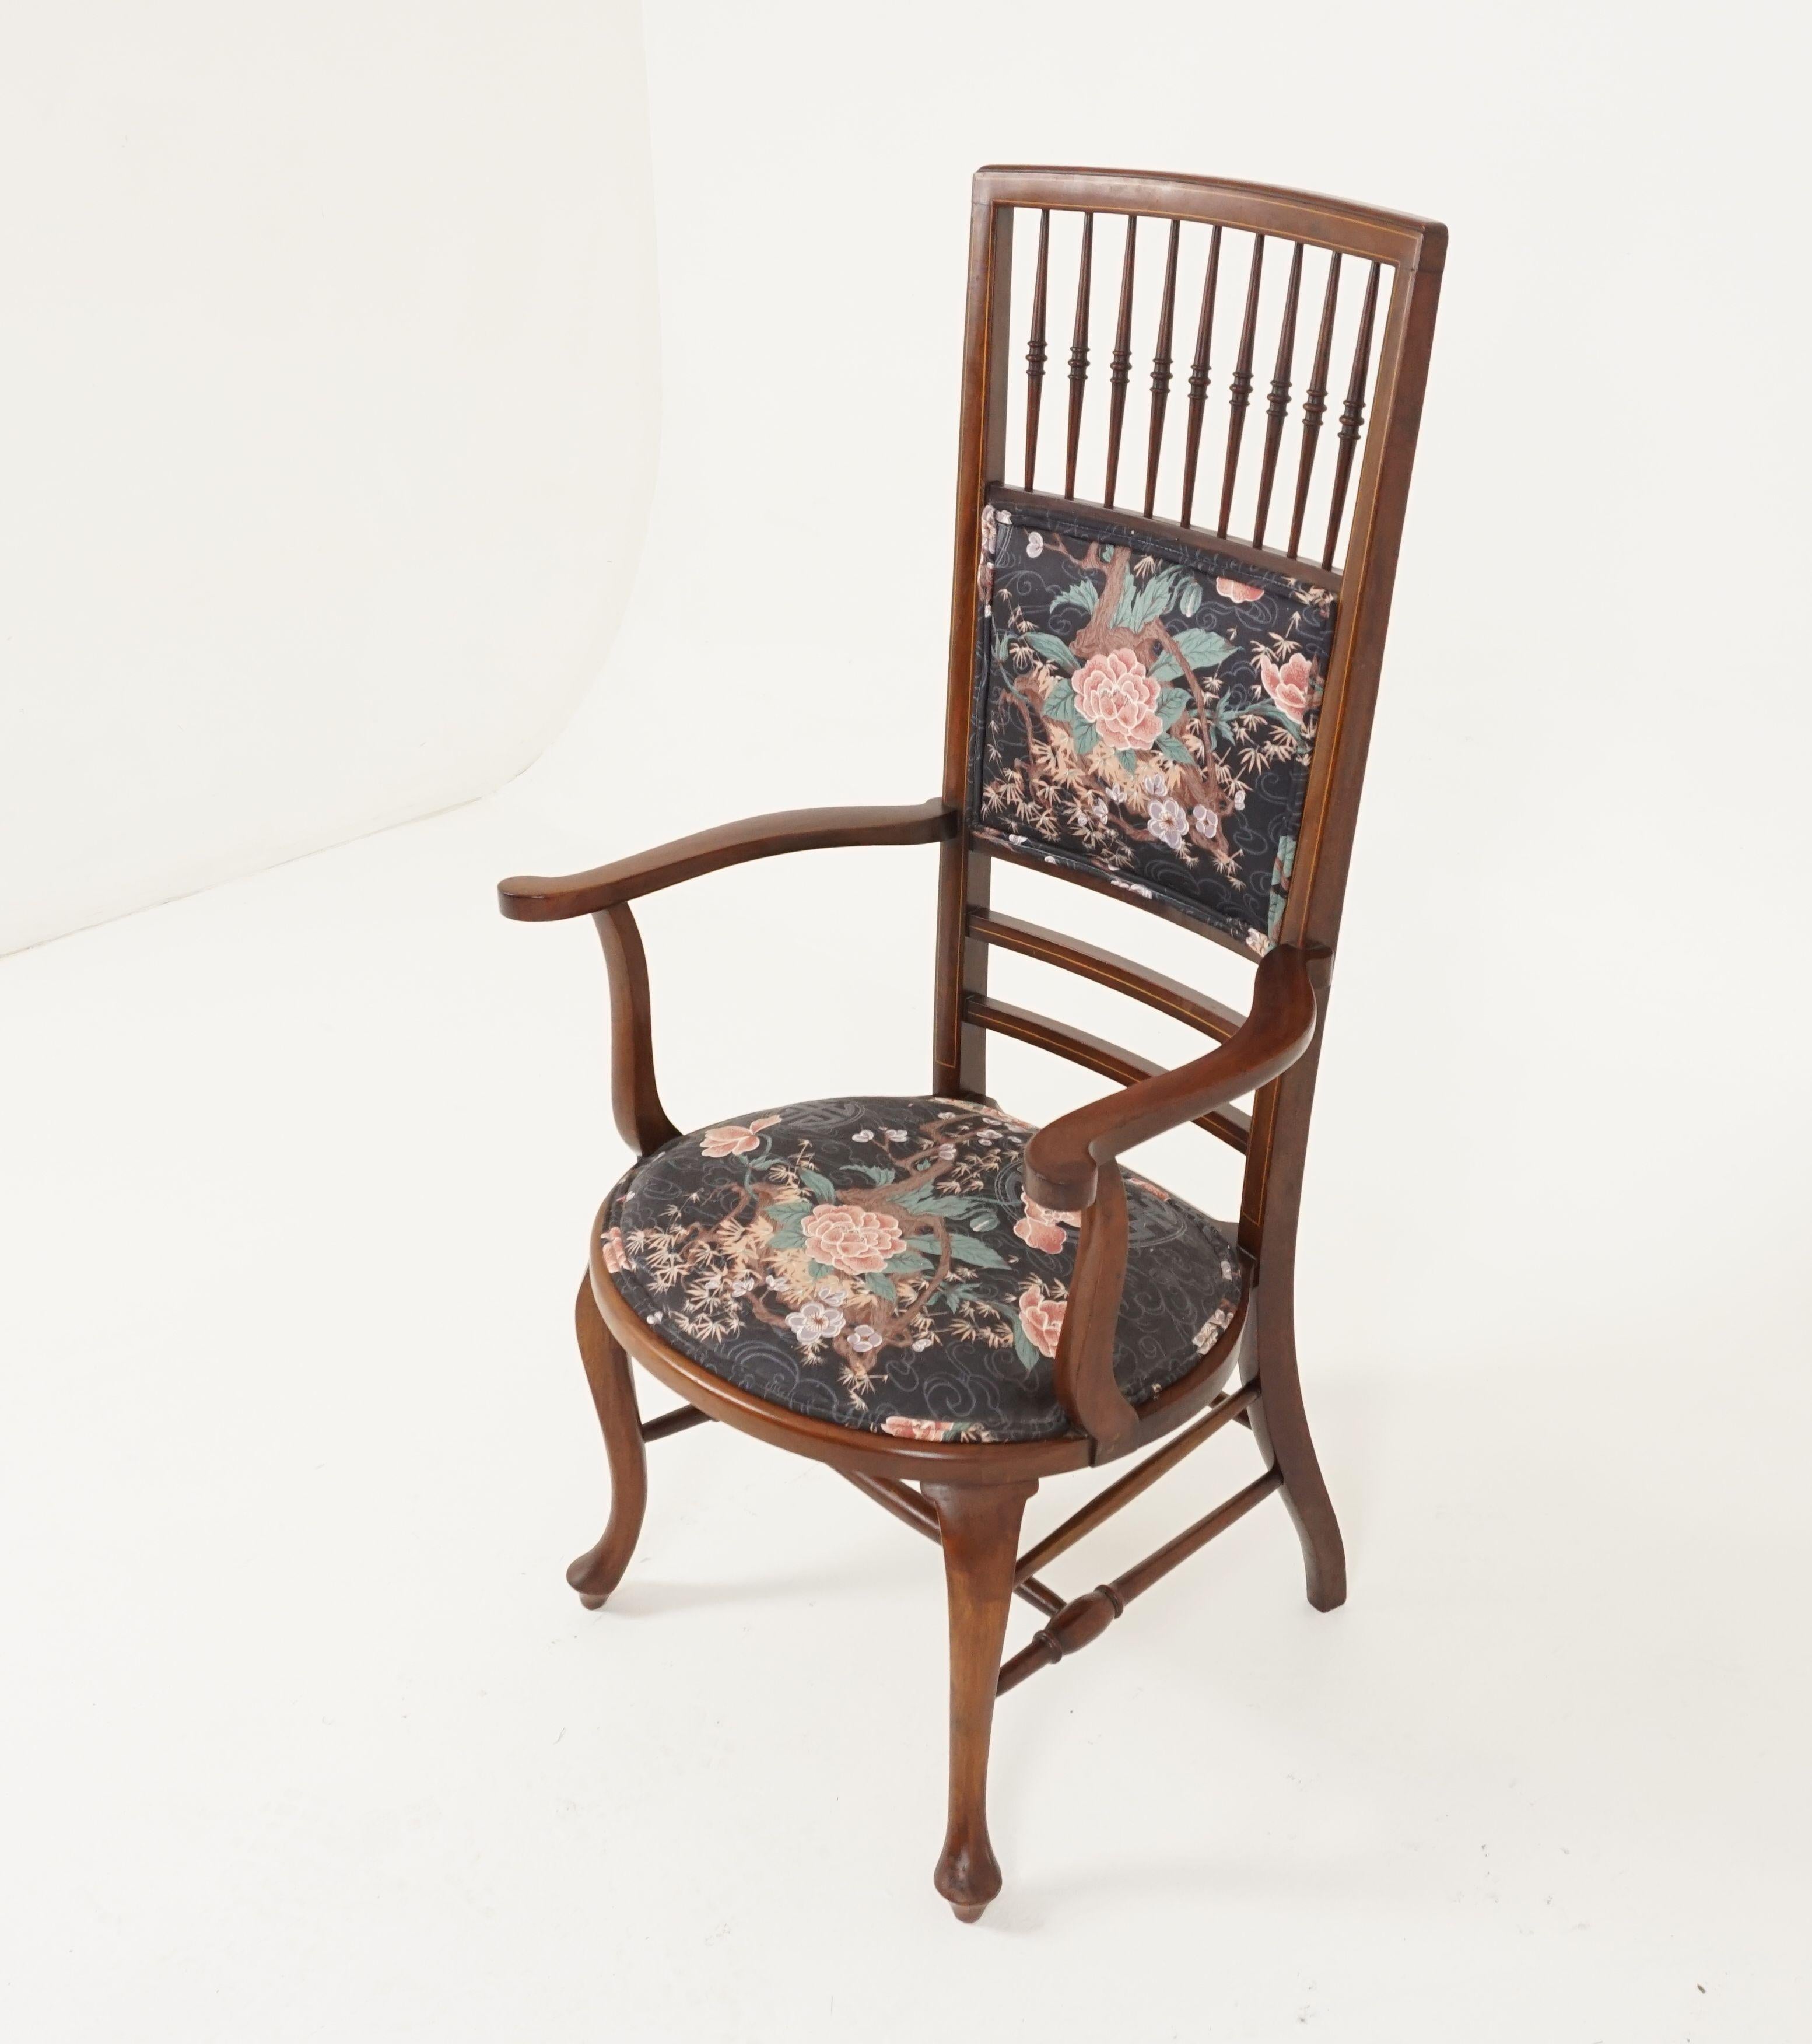 Edwardian inlaid walnut high back occasional arm chair, Scotland 1910, B2505

Scotland, 1910
Solid walnut
Original finish
Inlaid top rail
Open back with turned spindles
Padded back underneath
Pair of inlaid shaped rails below
Out swept arms
Oval